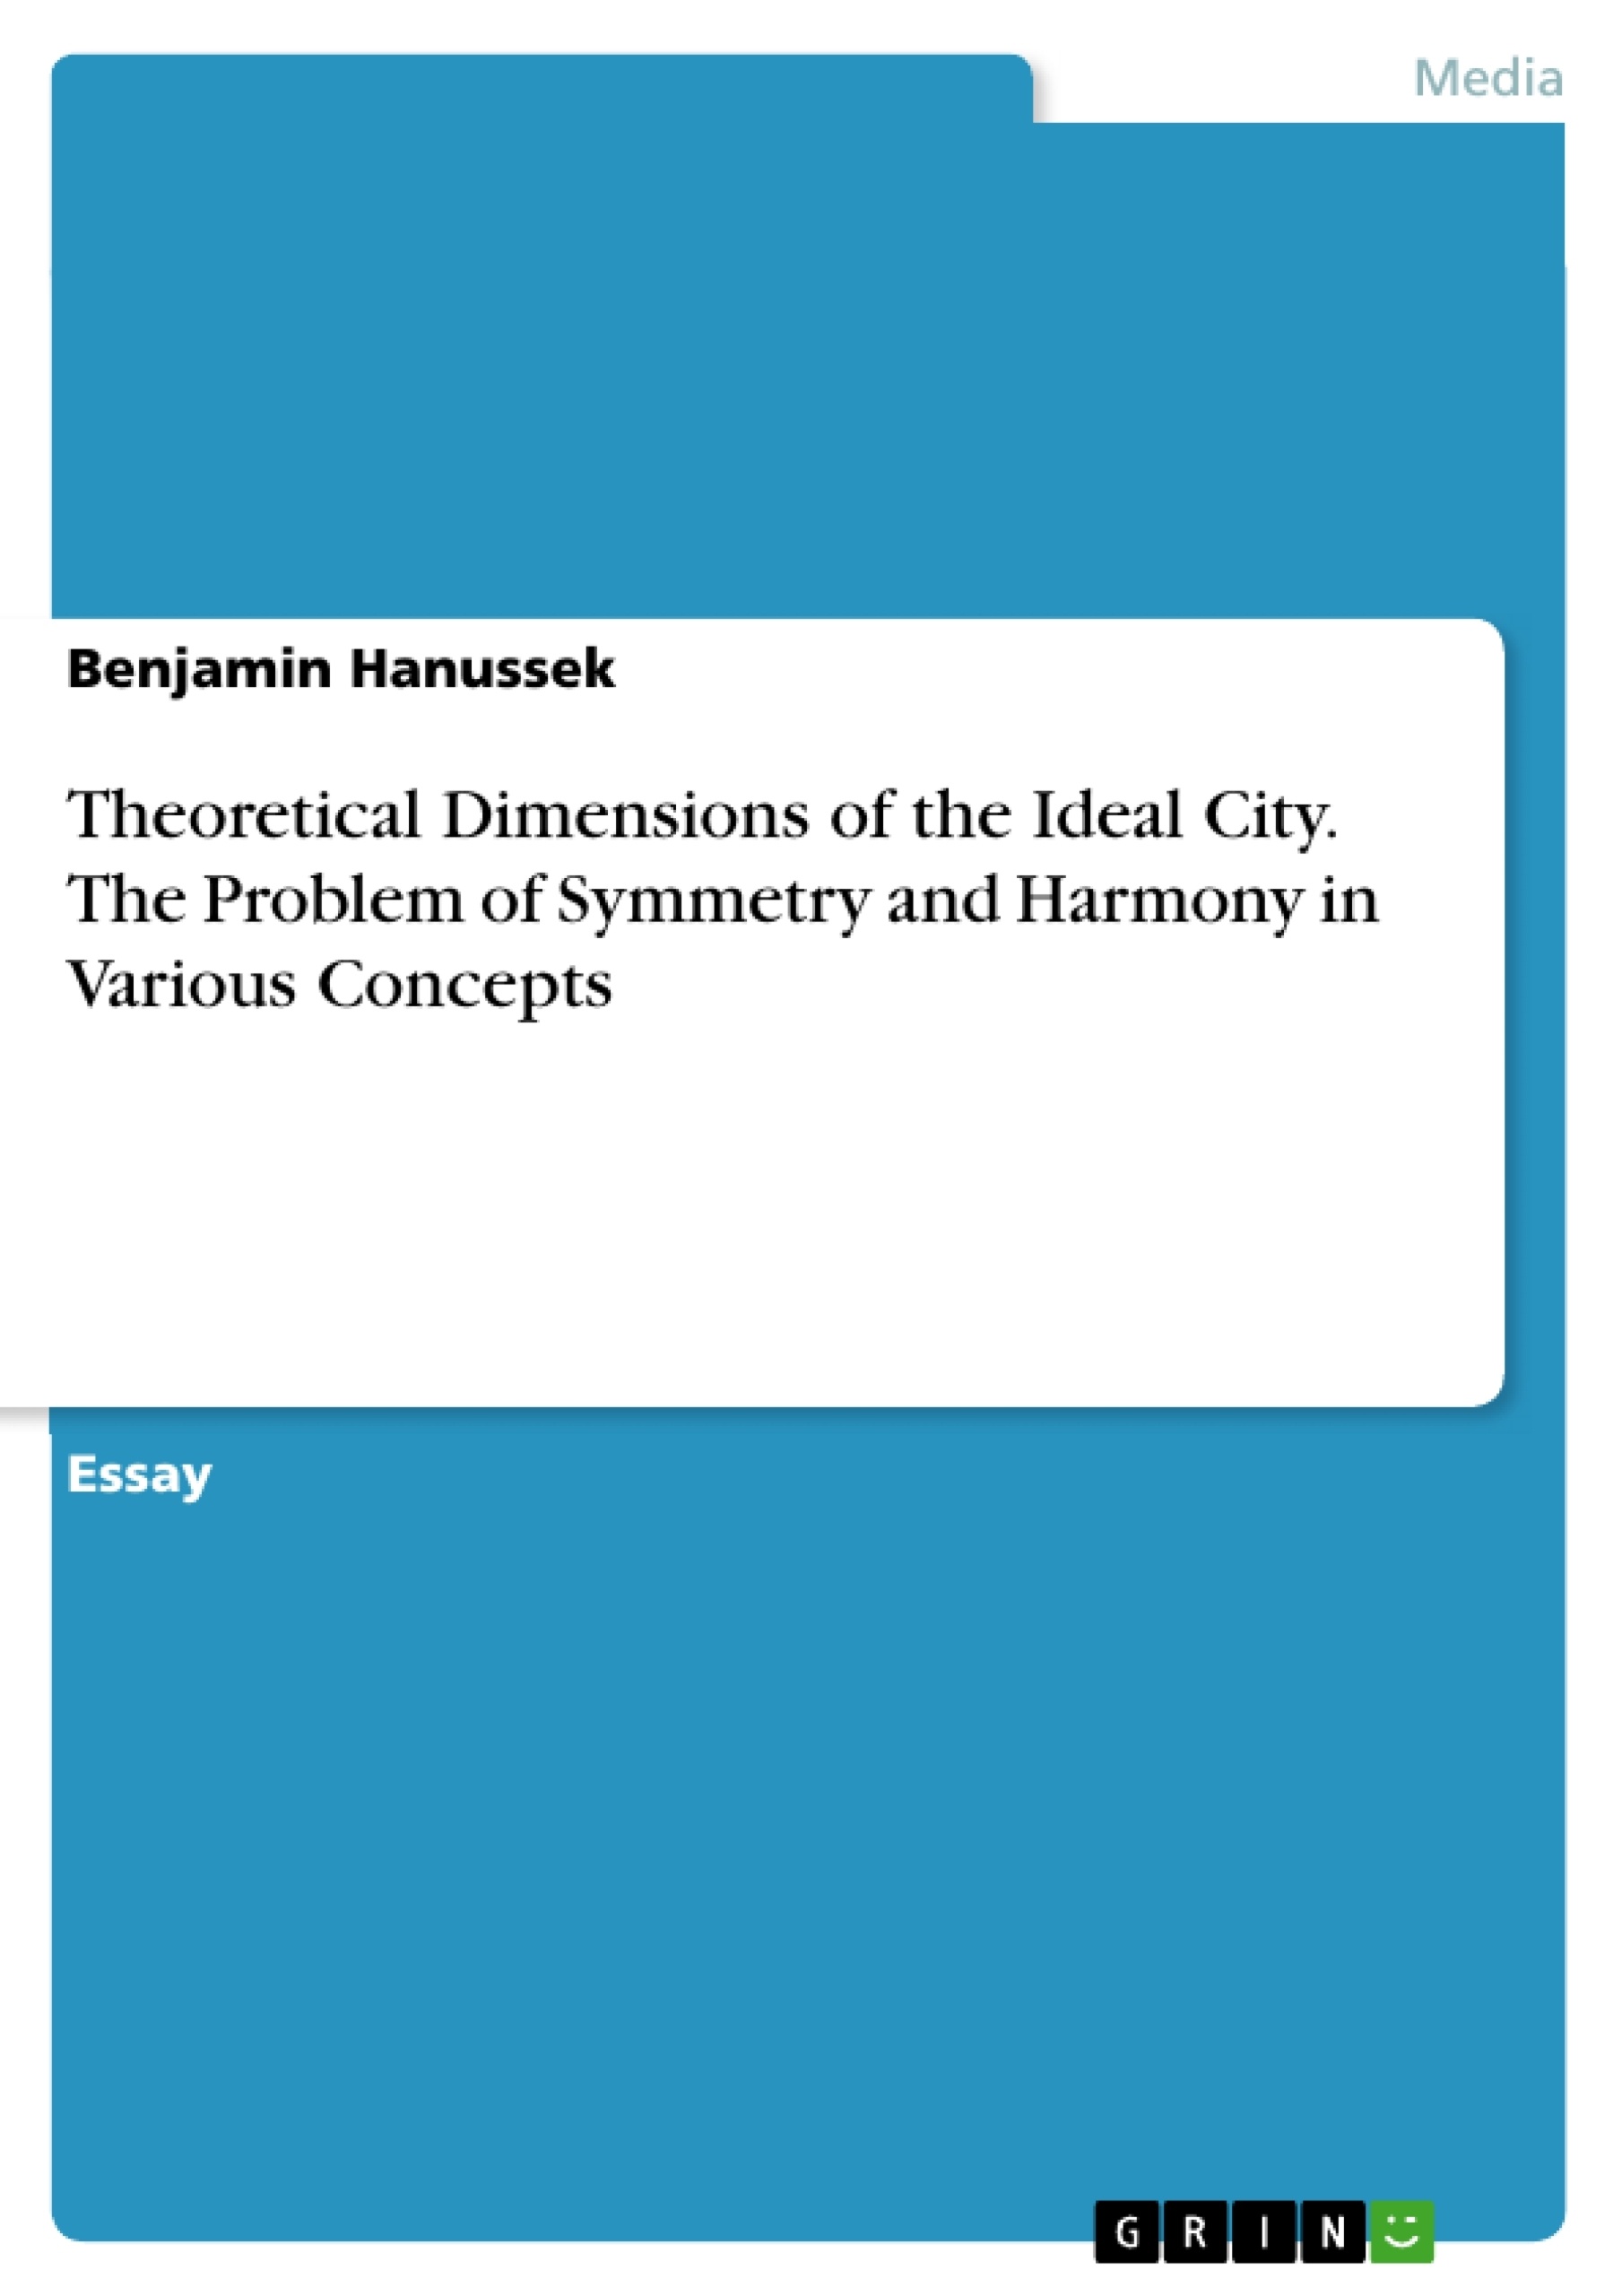 Titre: Theoretical Dimensions of the Ideal City. The Problem of Symmetry and Harmony in Various Concepts